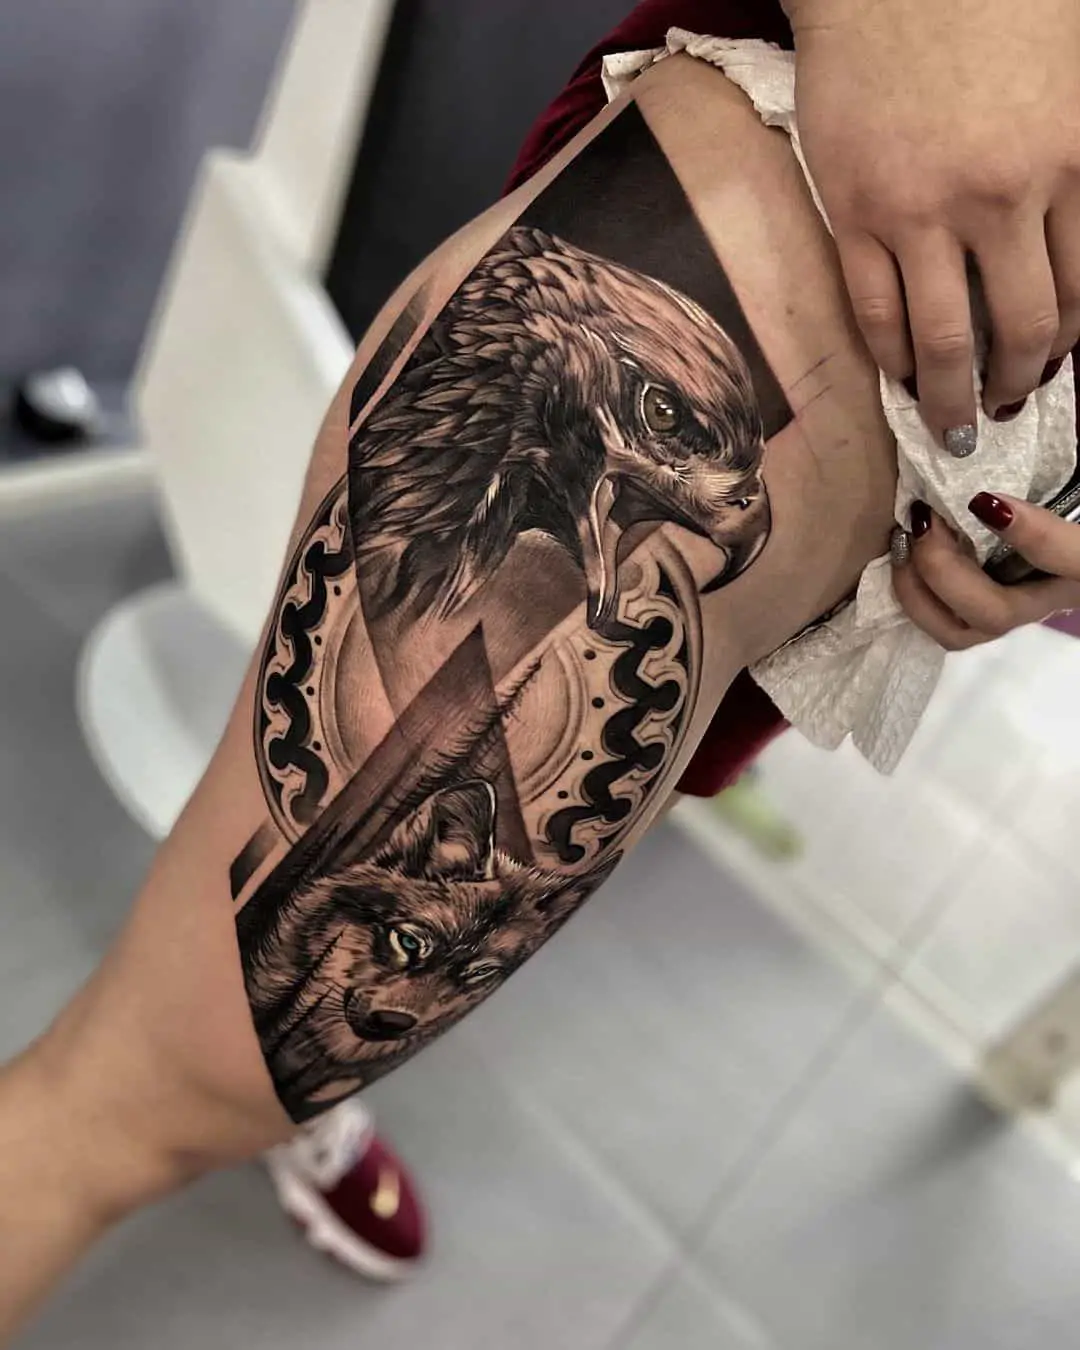 eagle and wolf tattoo on thigh by danielbedoyaart